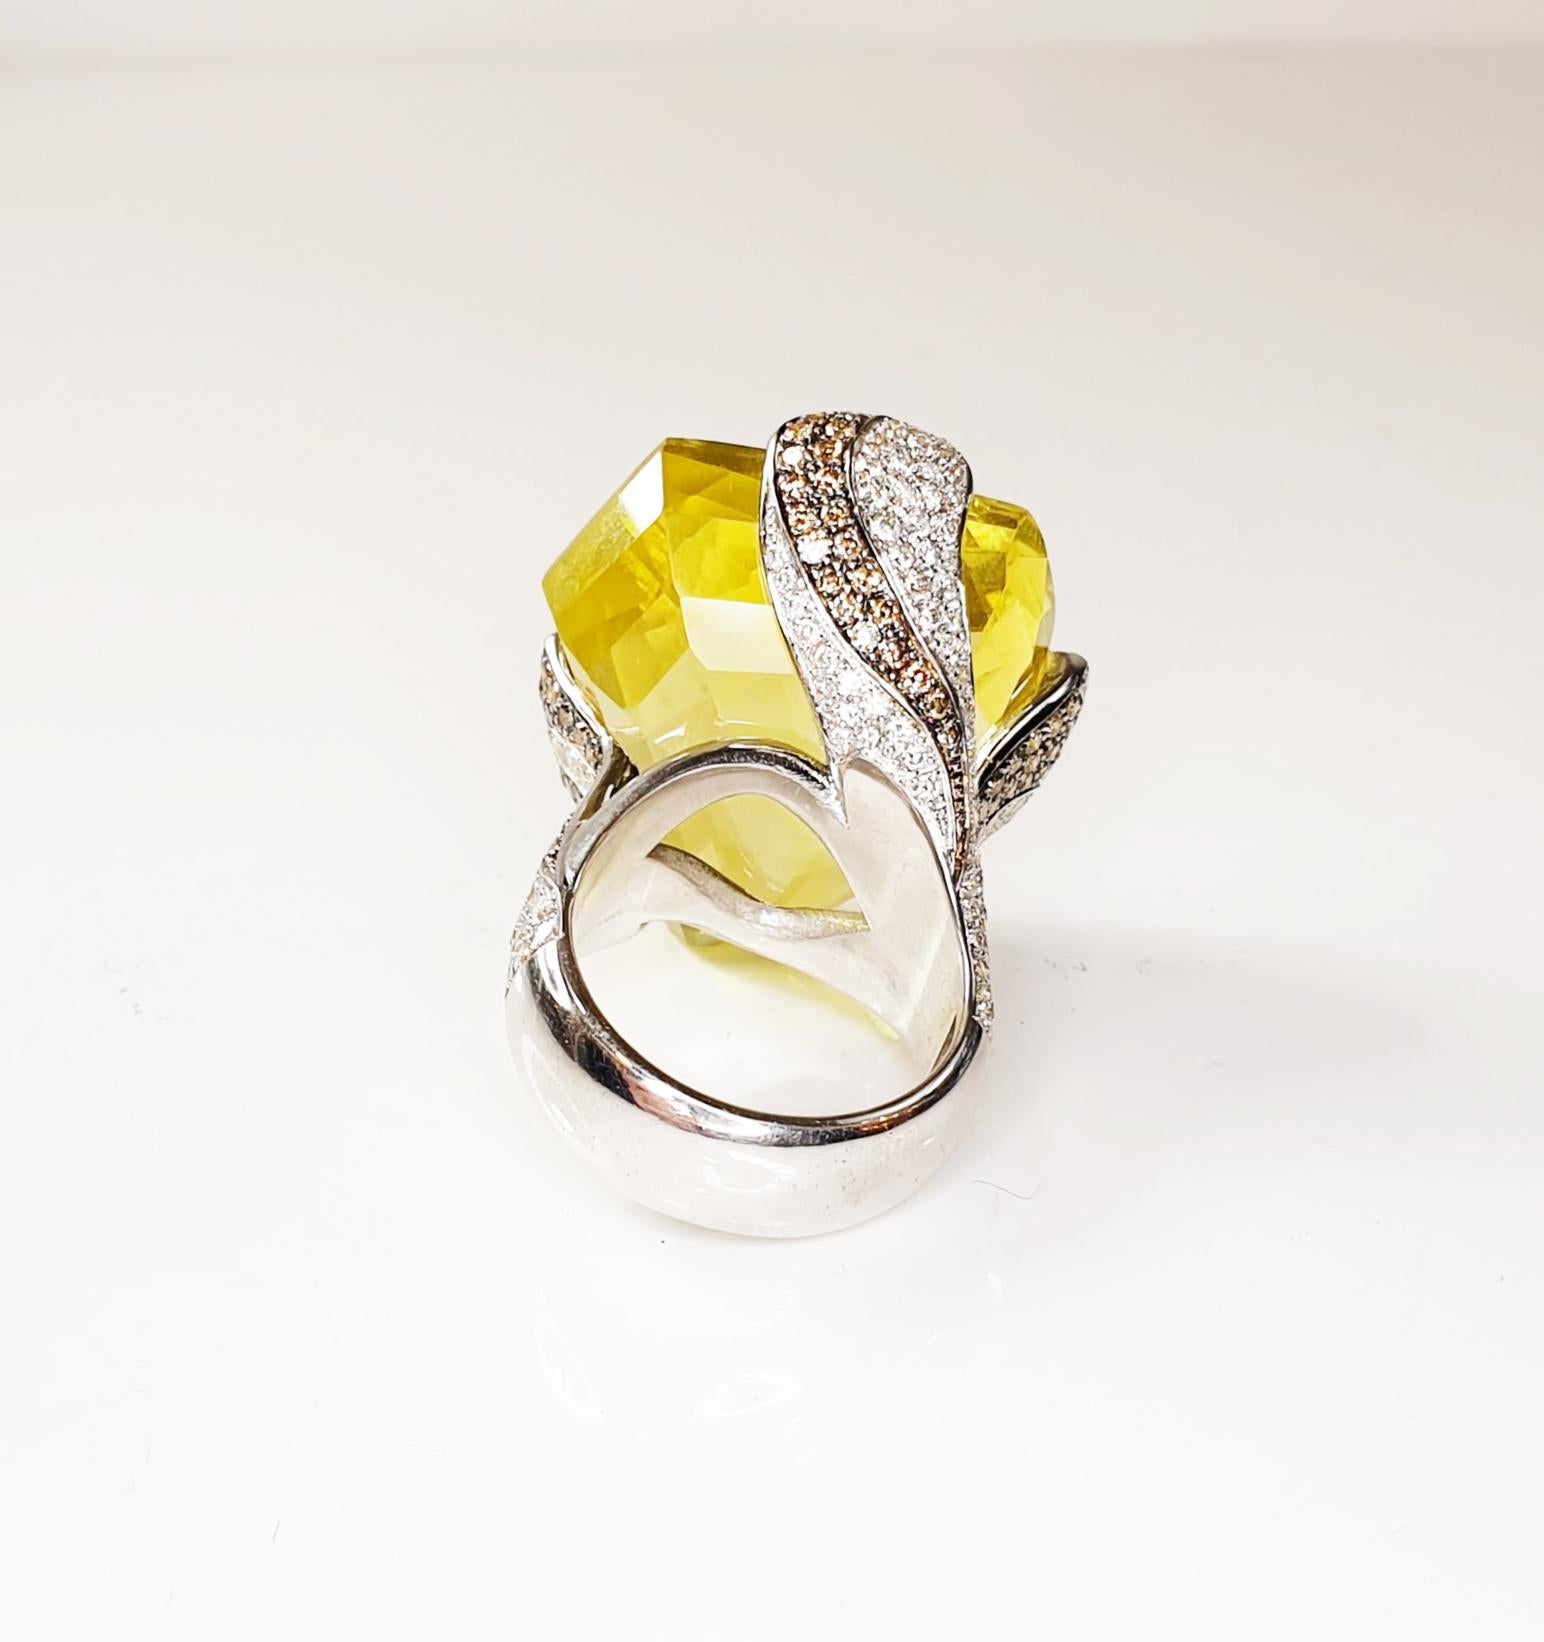 Multifaceted 51ct Citrine Quartz with Diamonds and 18k white gold ring
Irama Pradera is a dynamic and outgoing designer from Spain that searches always for the best gems and combines classic with contemporary mounting and styles.

This 35ct amethyst